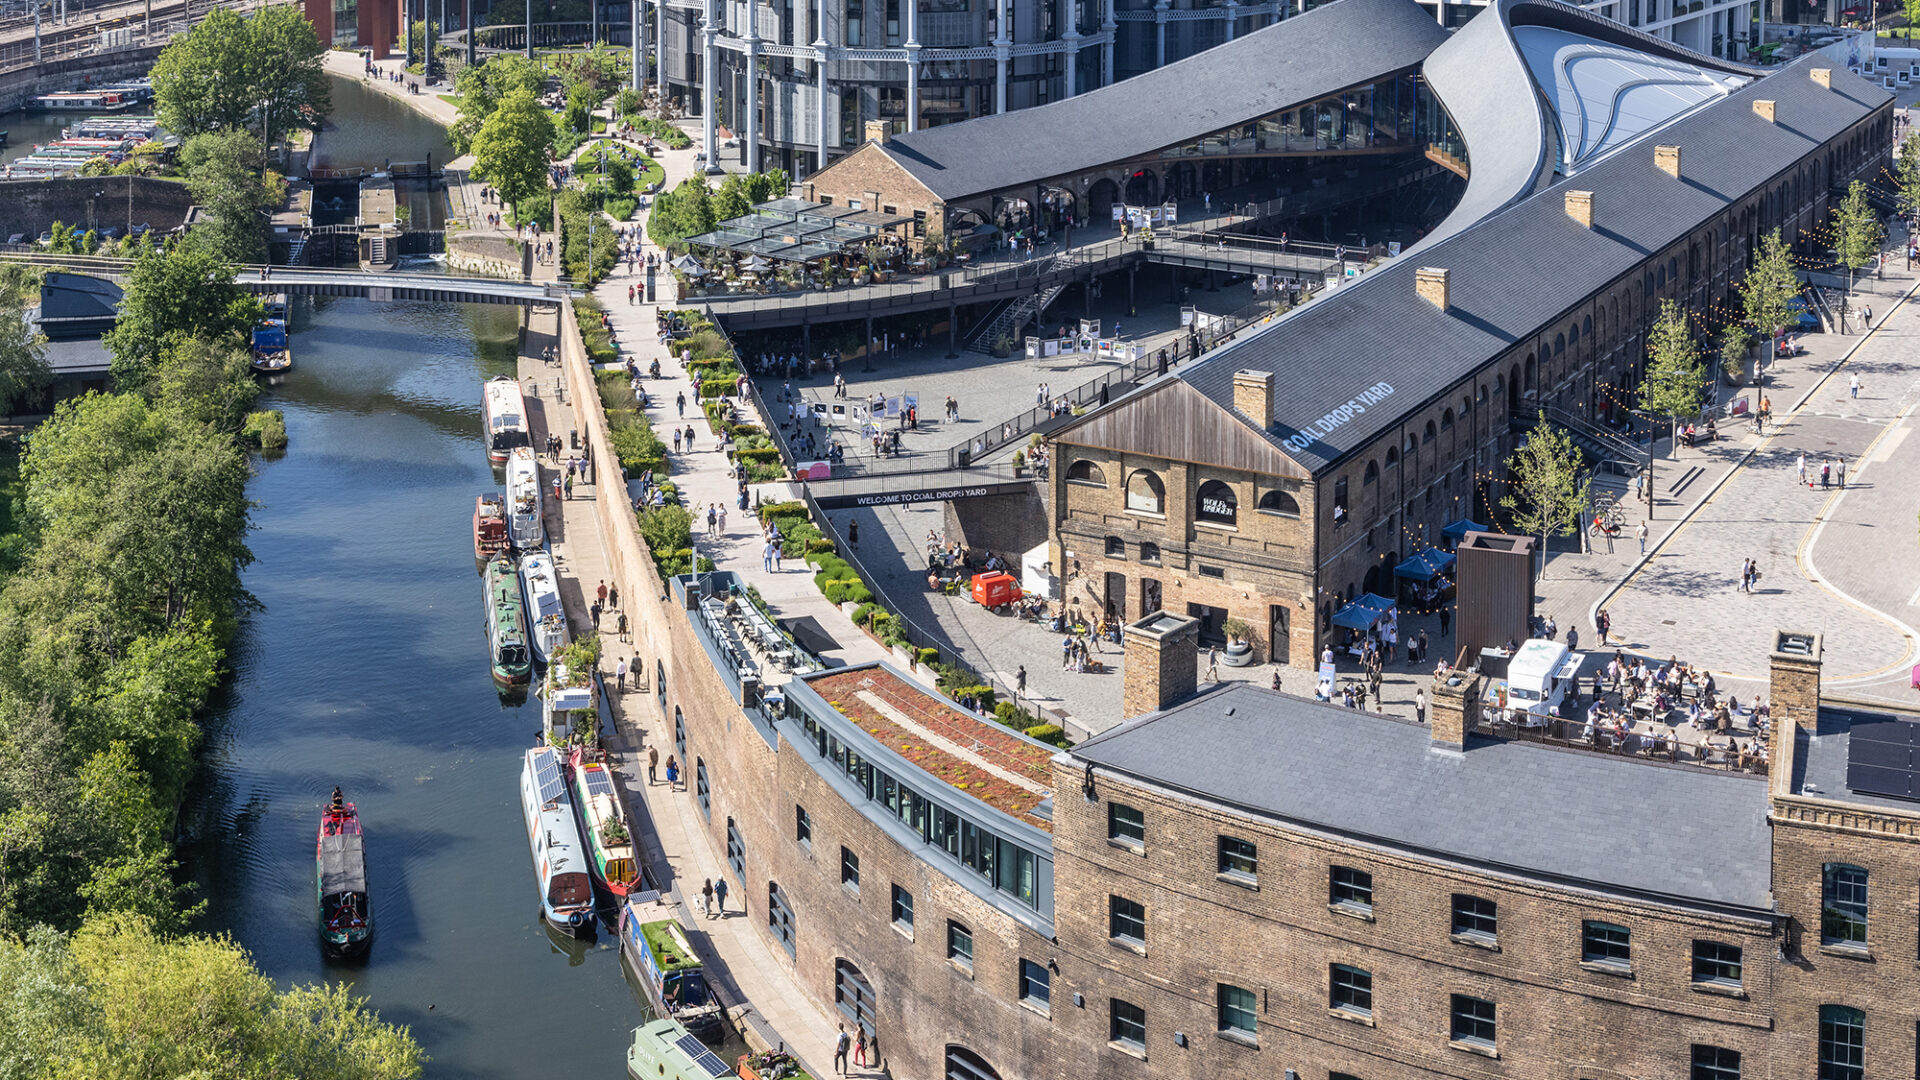 Aerial view of Coal Drops Yard and Regent's Canal, King's Cross